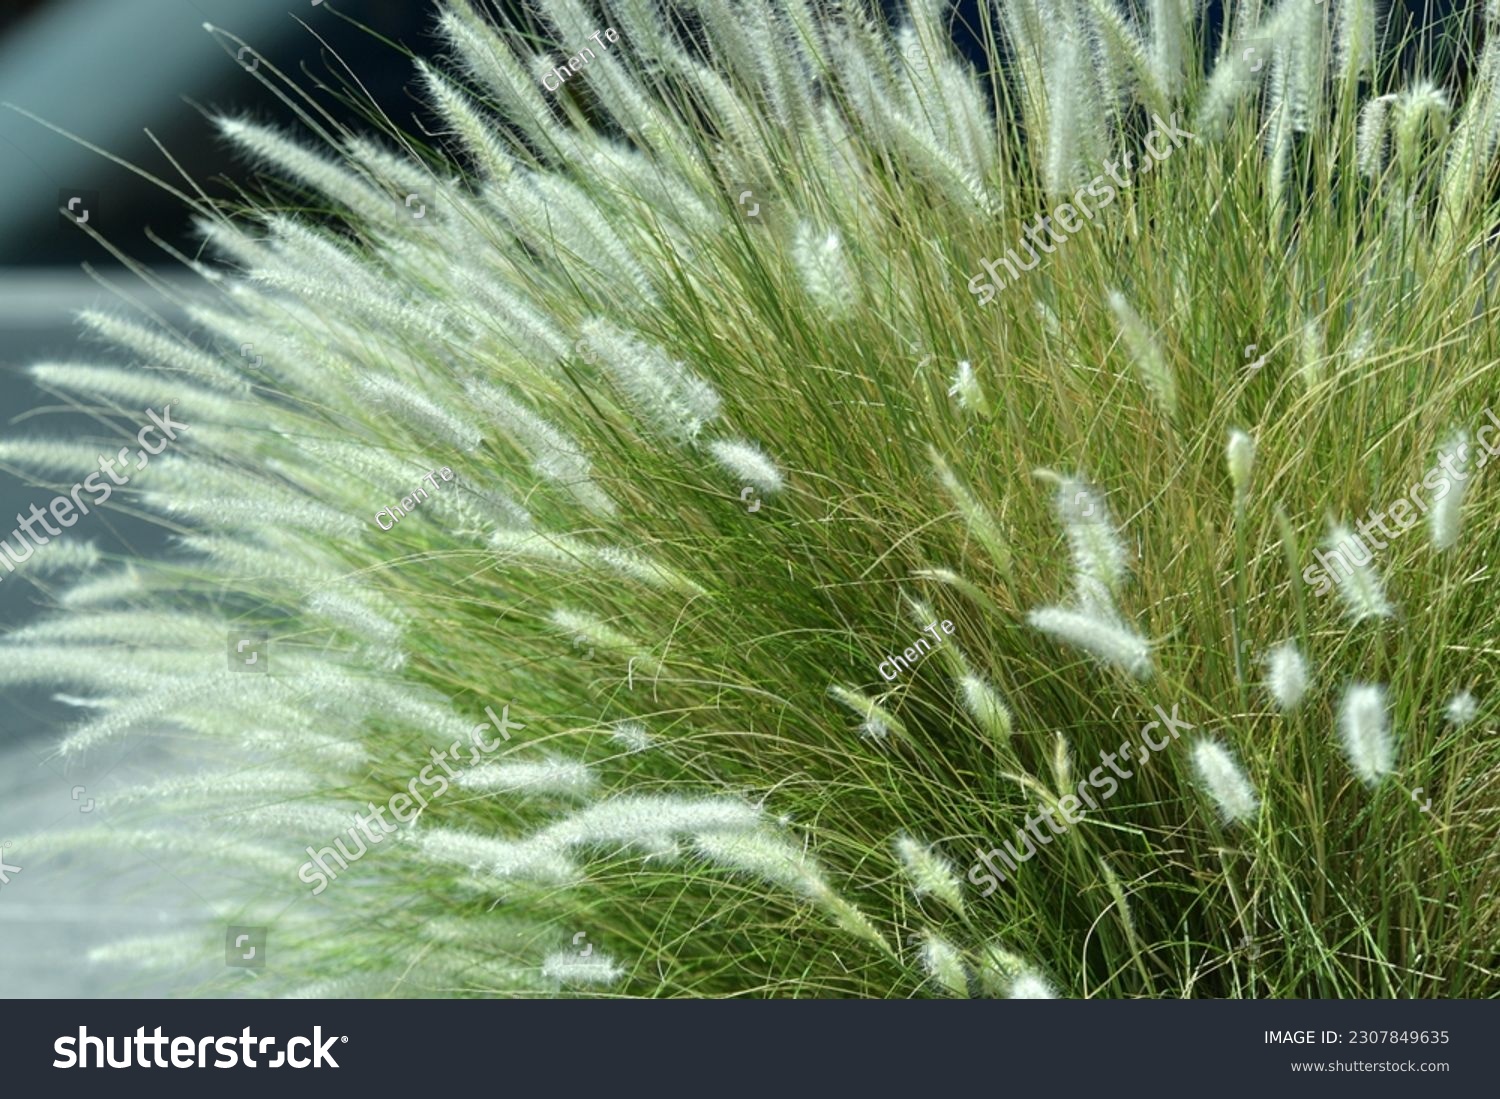 Pennisetum alopecuroides, the Chinese pennisetum, Chinese fountaingrass, dwarf fountain grass, foxtail fountain grass, or swamp foxtail grass, is a species of perennial grass native to Asia #2307849635